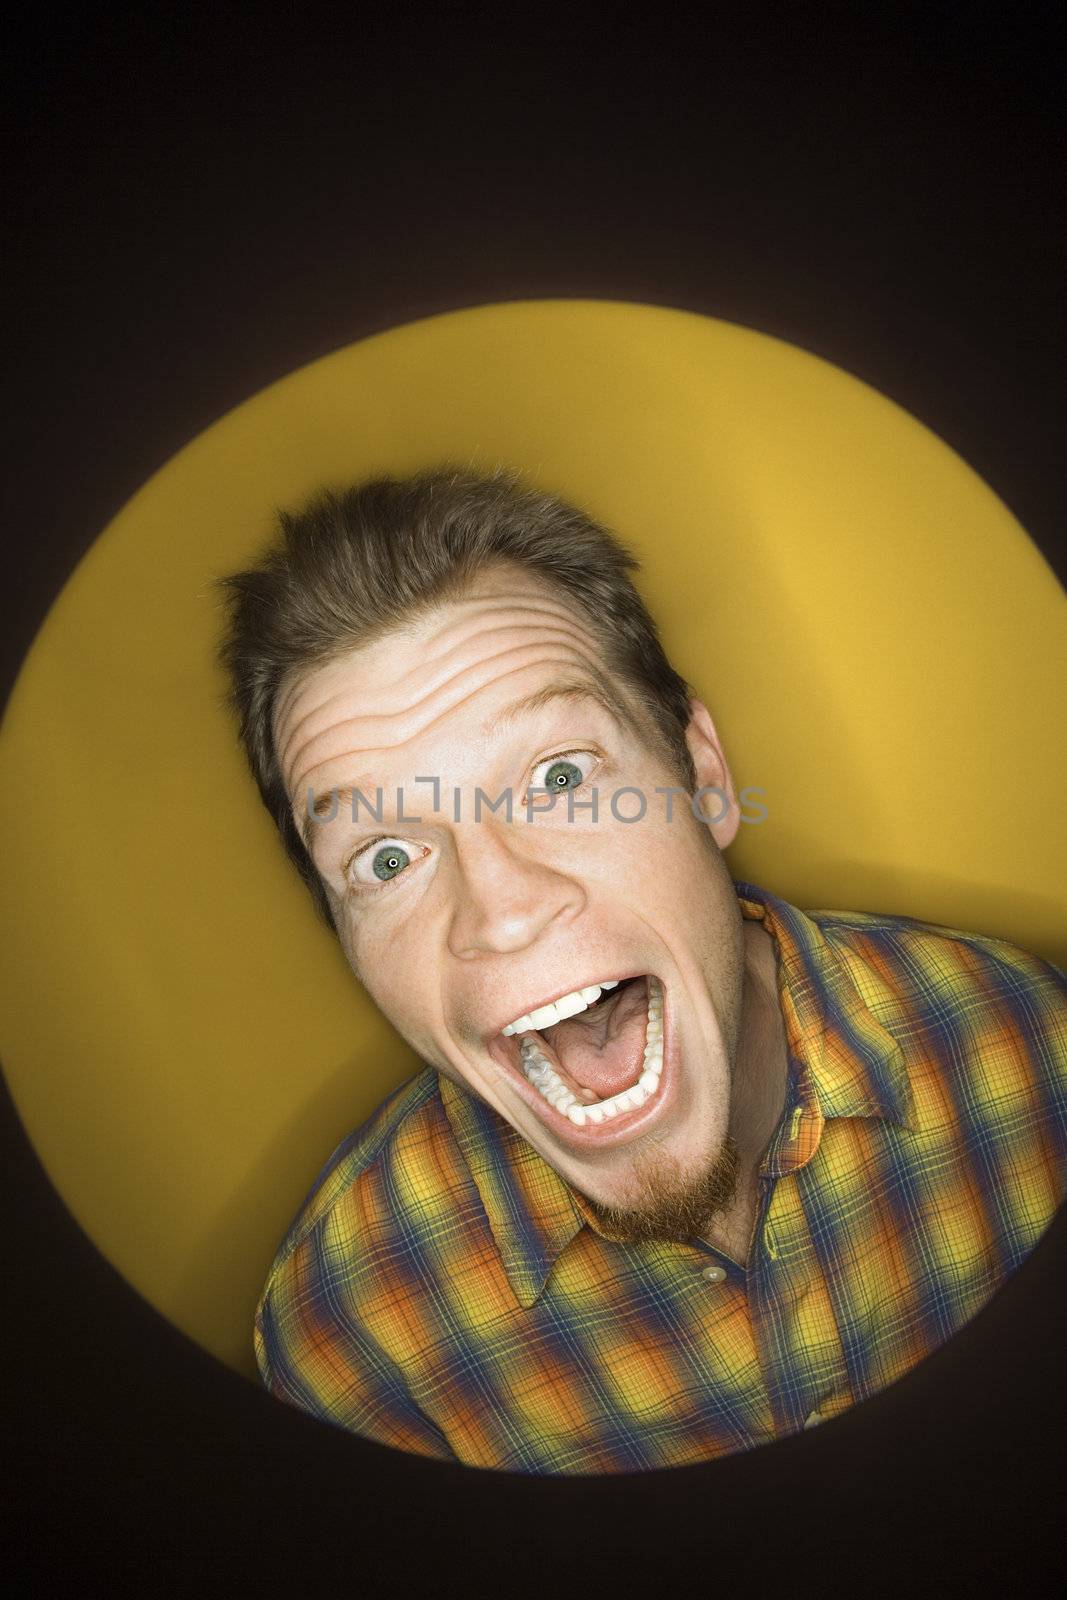 Vignette of adult Caucasian man on yellow background making funny face at viewer.